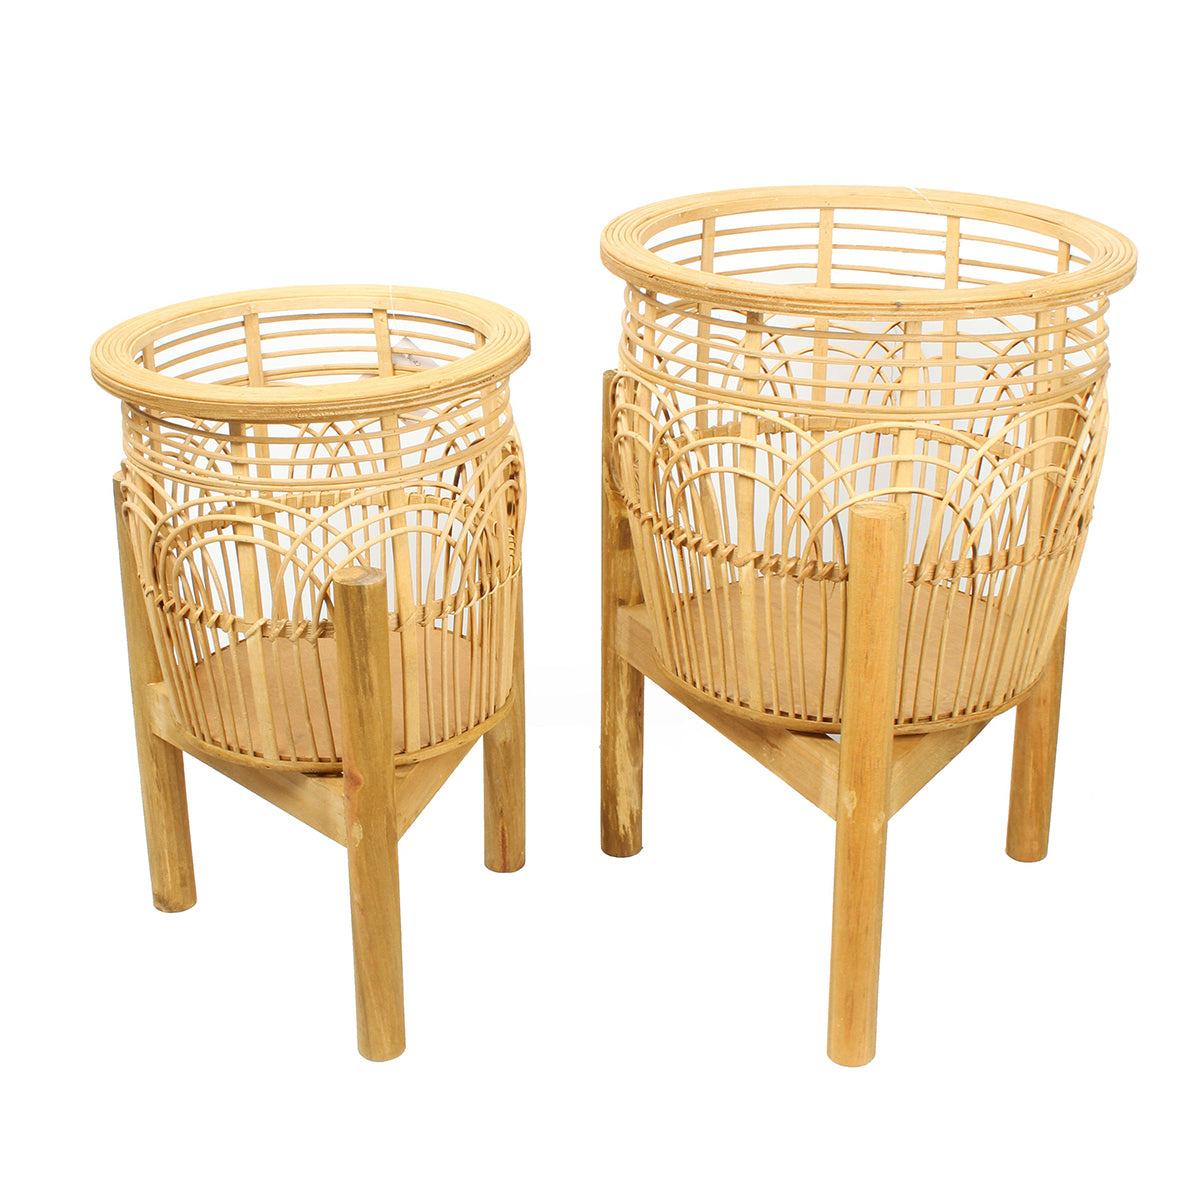 Banks Natural Planter With Legs Set Of 2